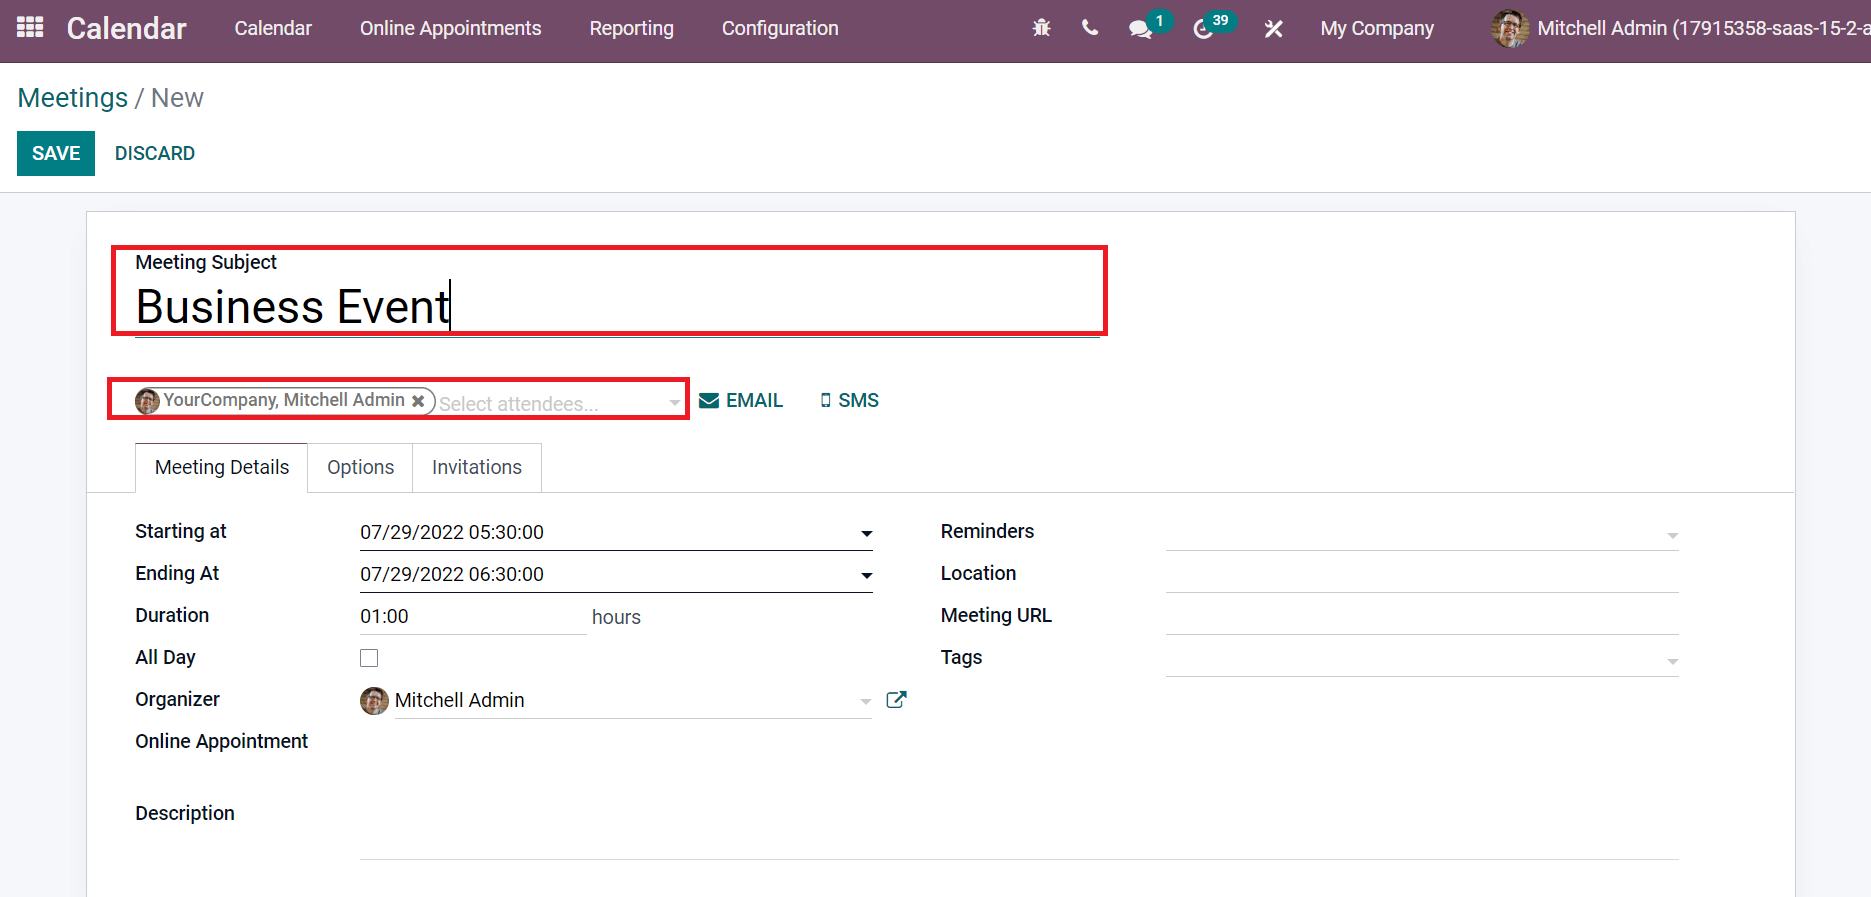 odoo-15-calendar-to-manage-appointments-events-in-a-business-cybrosys